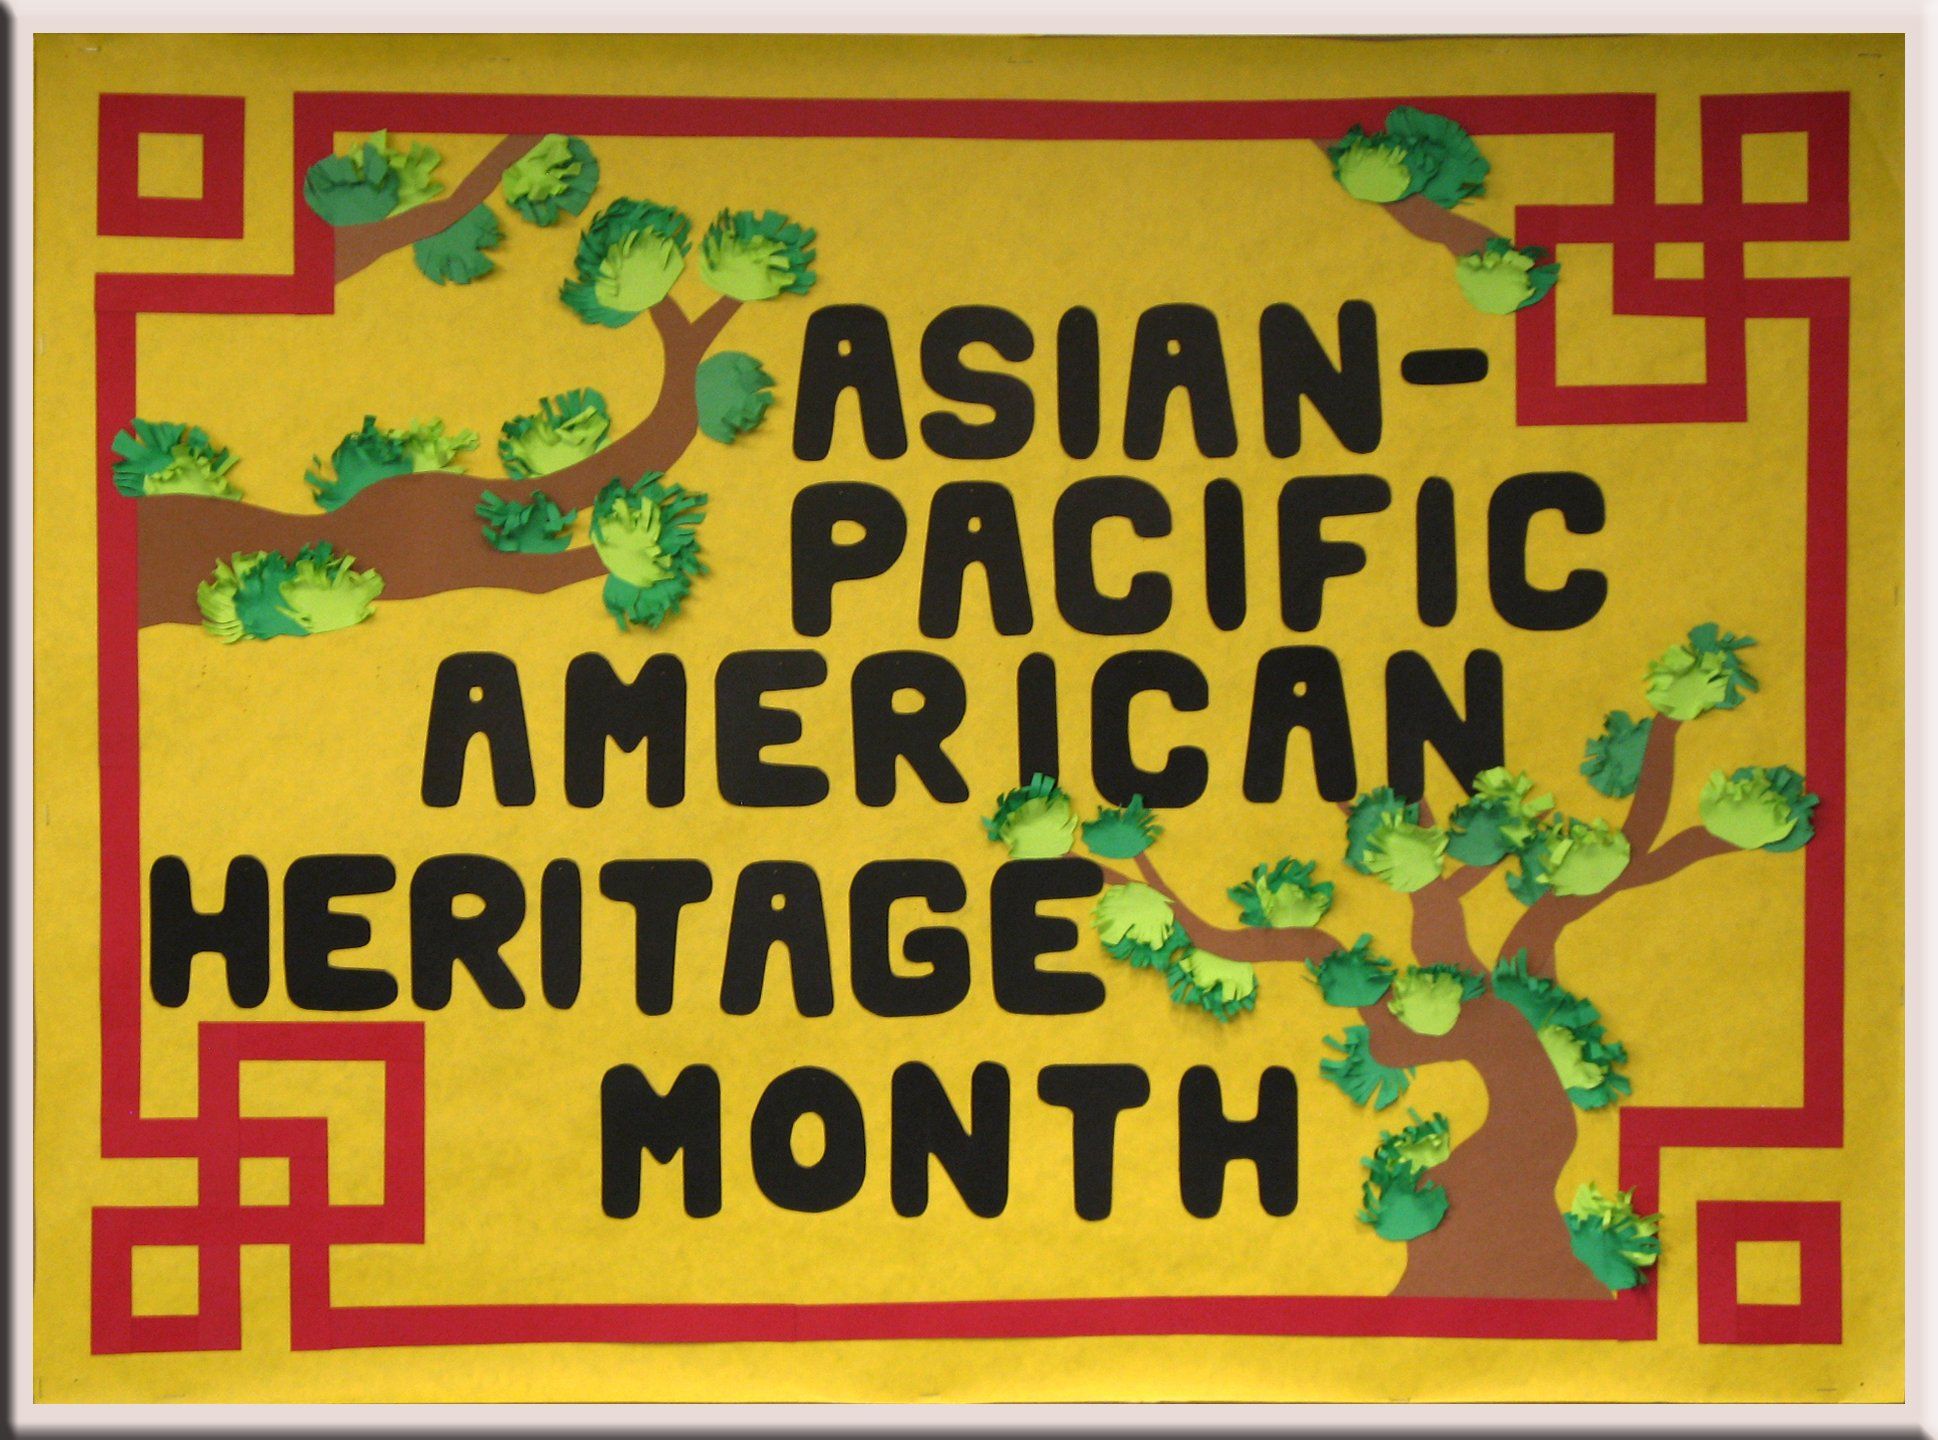 best of Pascific month Asian